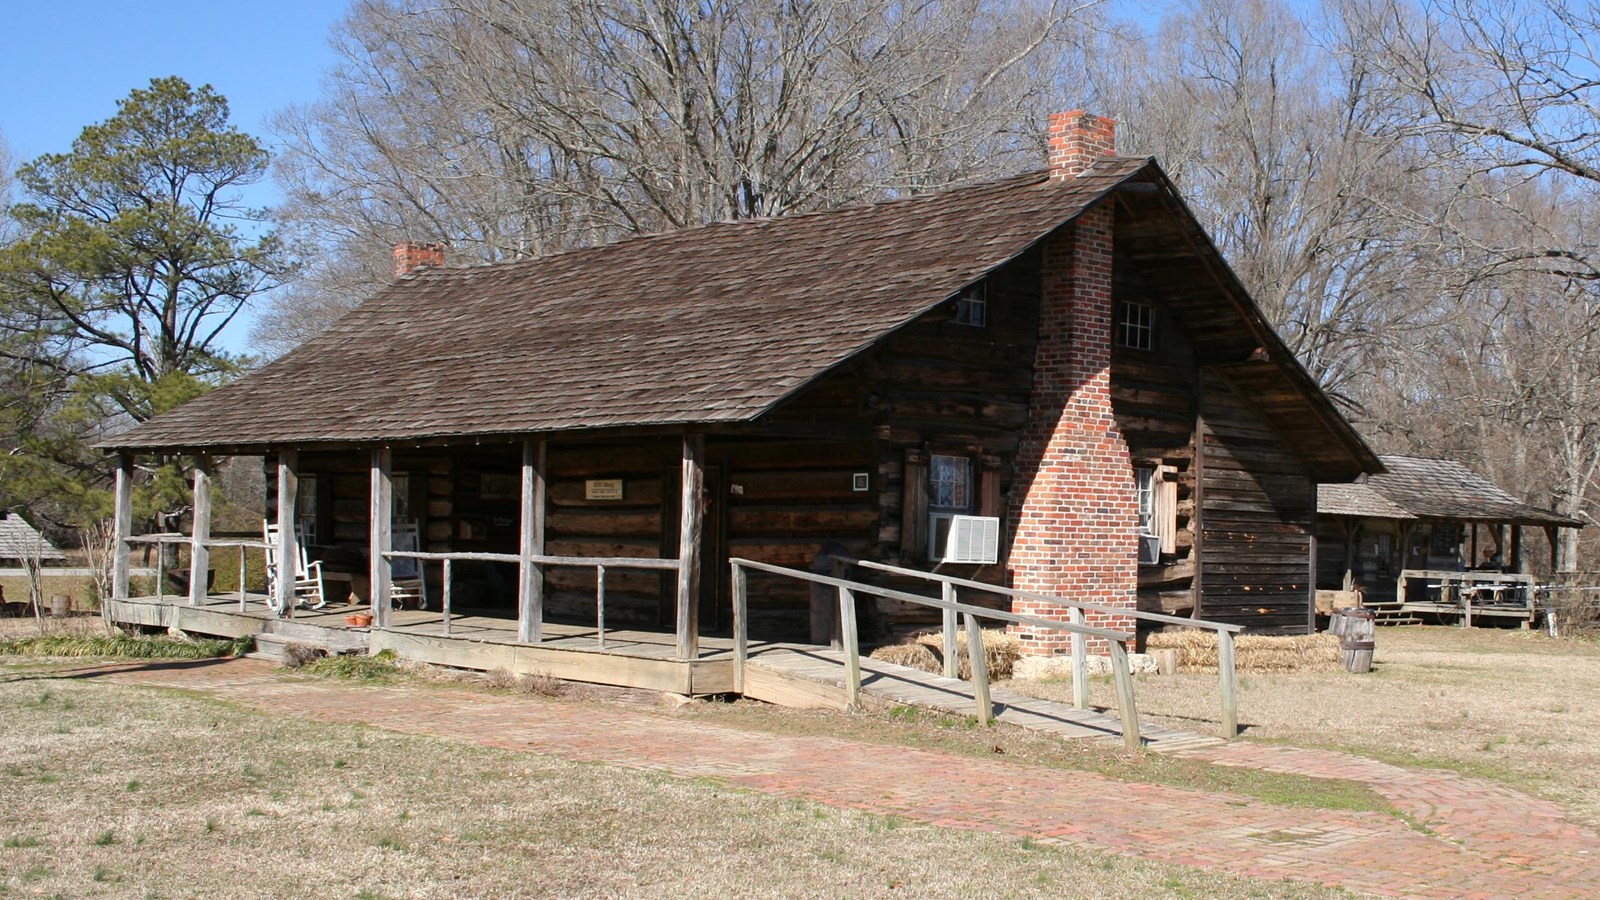 Log cabin with wooden railing surrounding the front porch. The brick chimney is facing the viewer